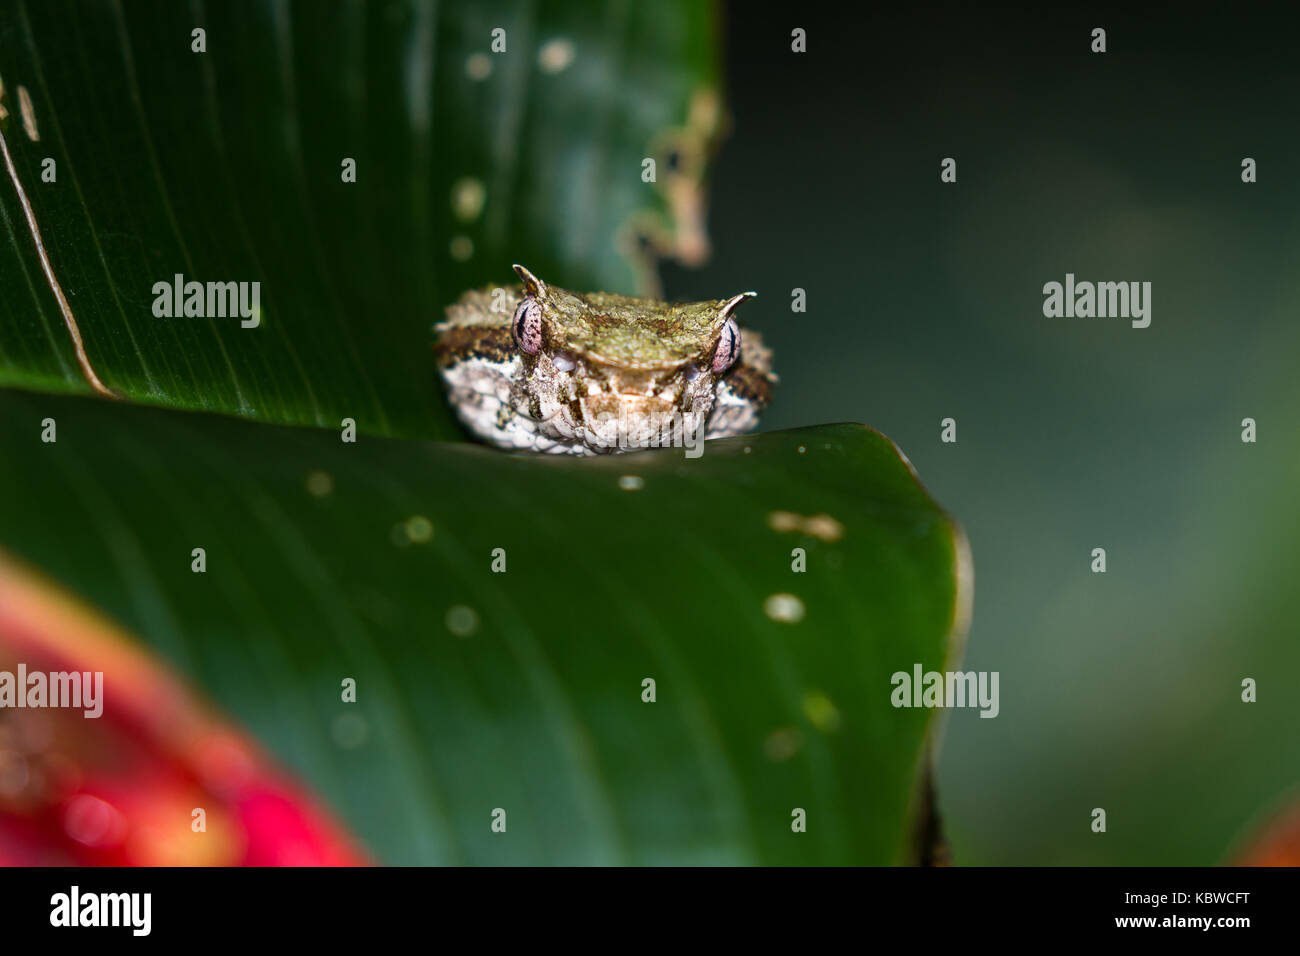 Close up of a eyelash viper crawling on a broad green leaf in Costa Rica Stock Photo